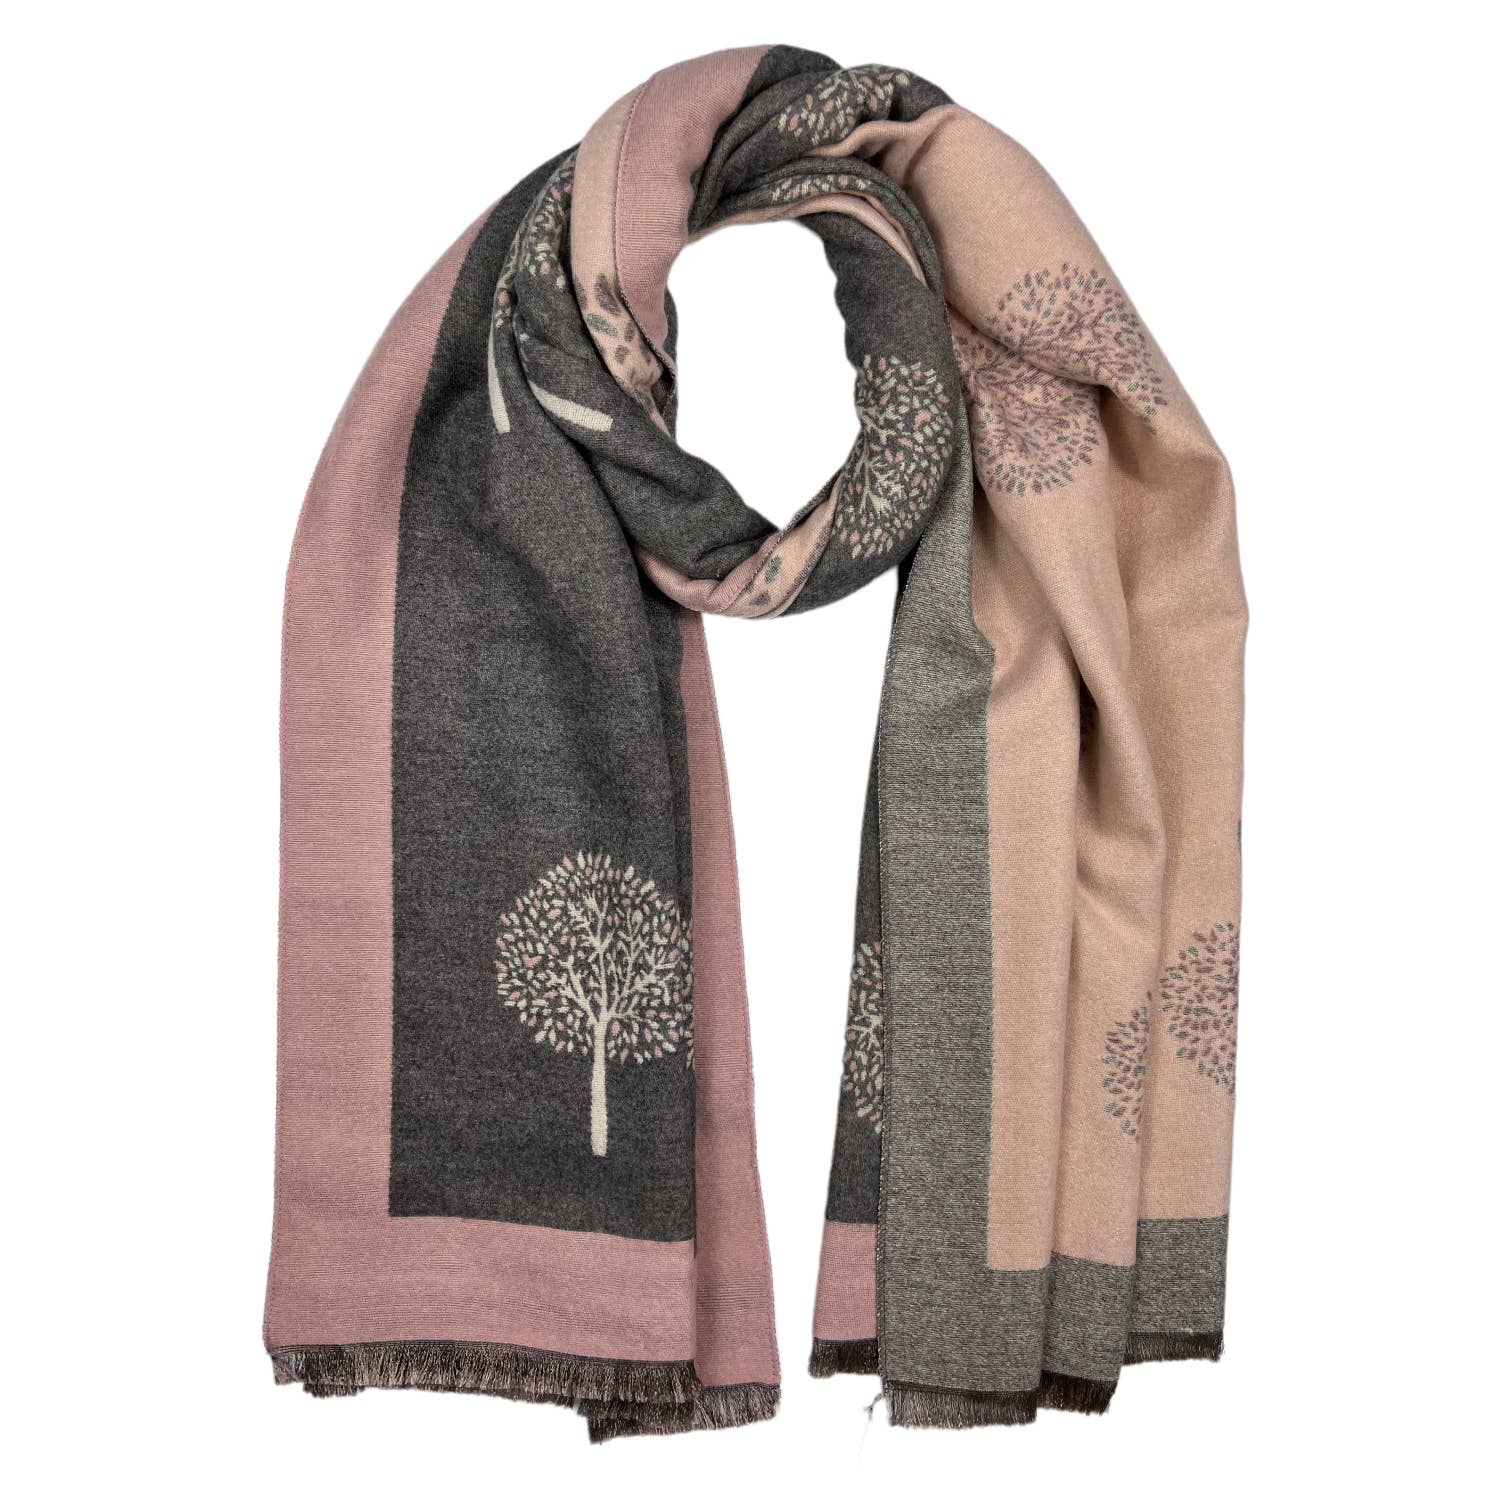 Scarf, Reversible Tree Print Cashmere Blend, Charcoal/Pink